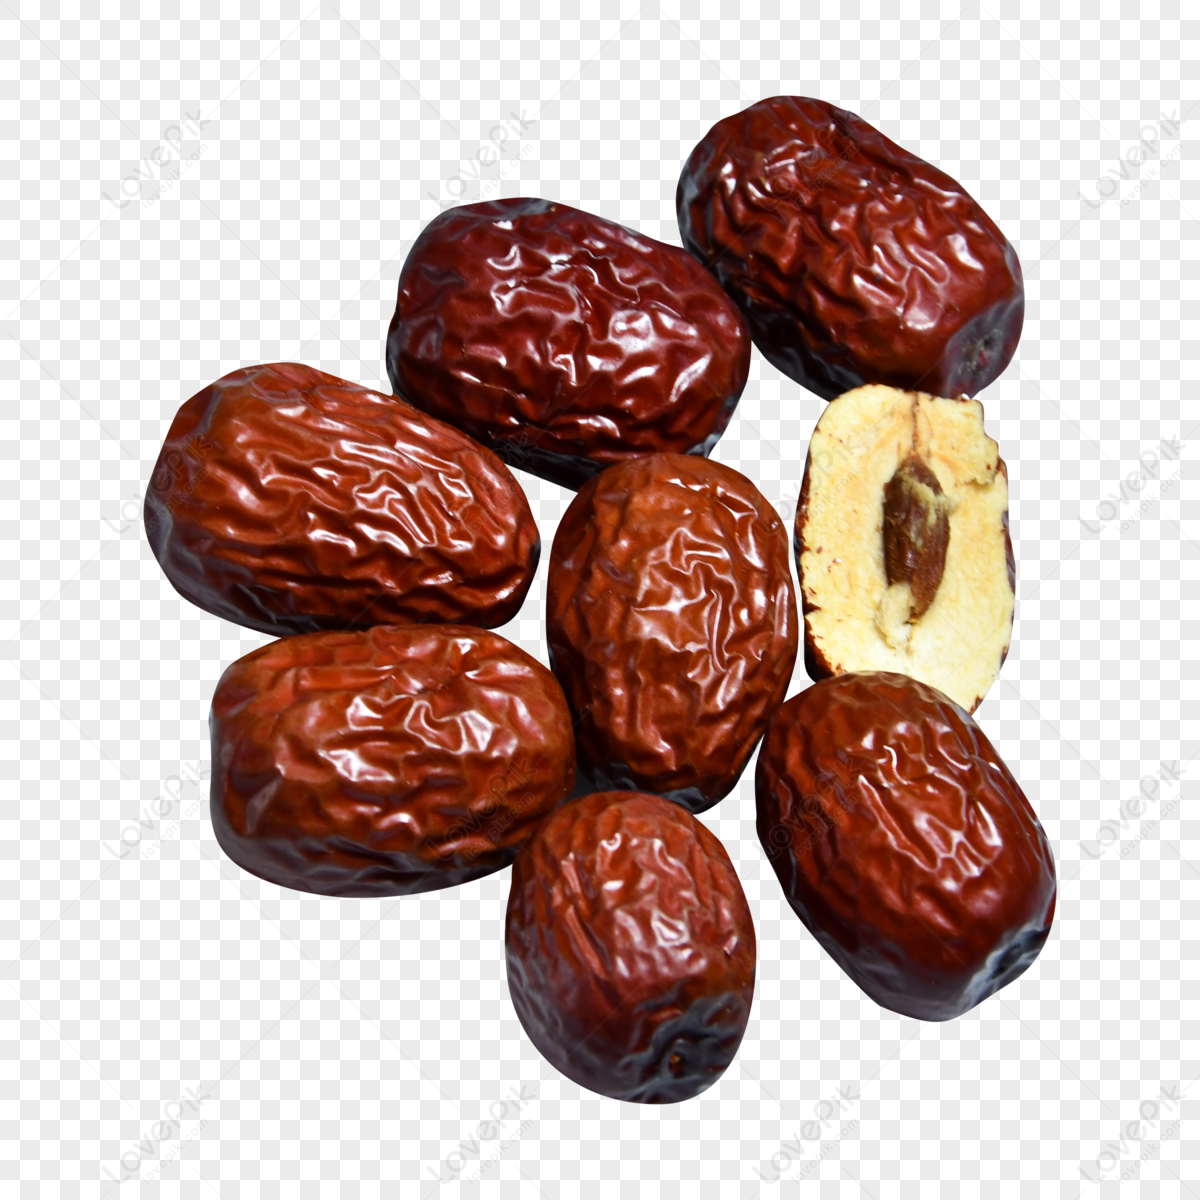 Red Date Slices PNG Images With Transparent Background | Free Download ...